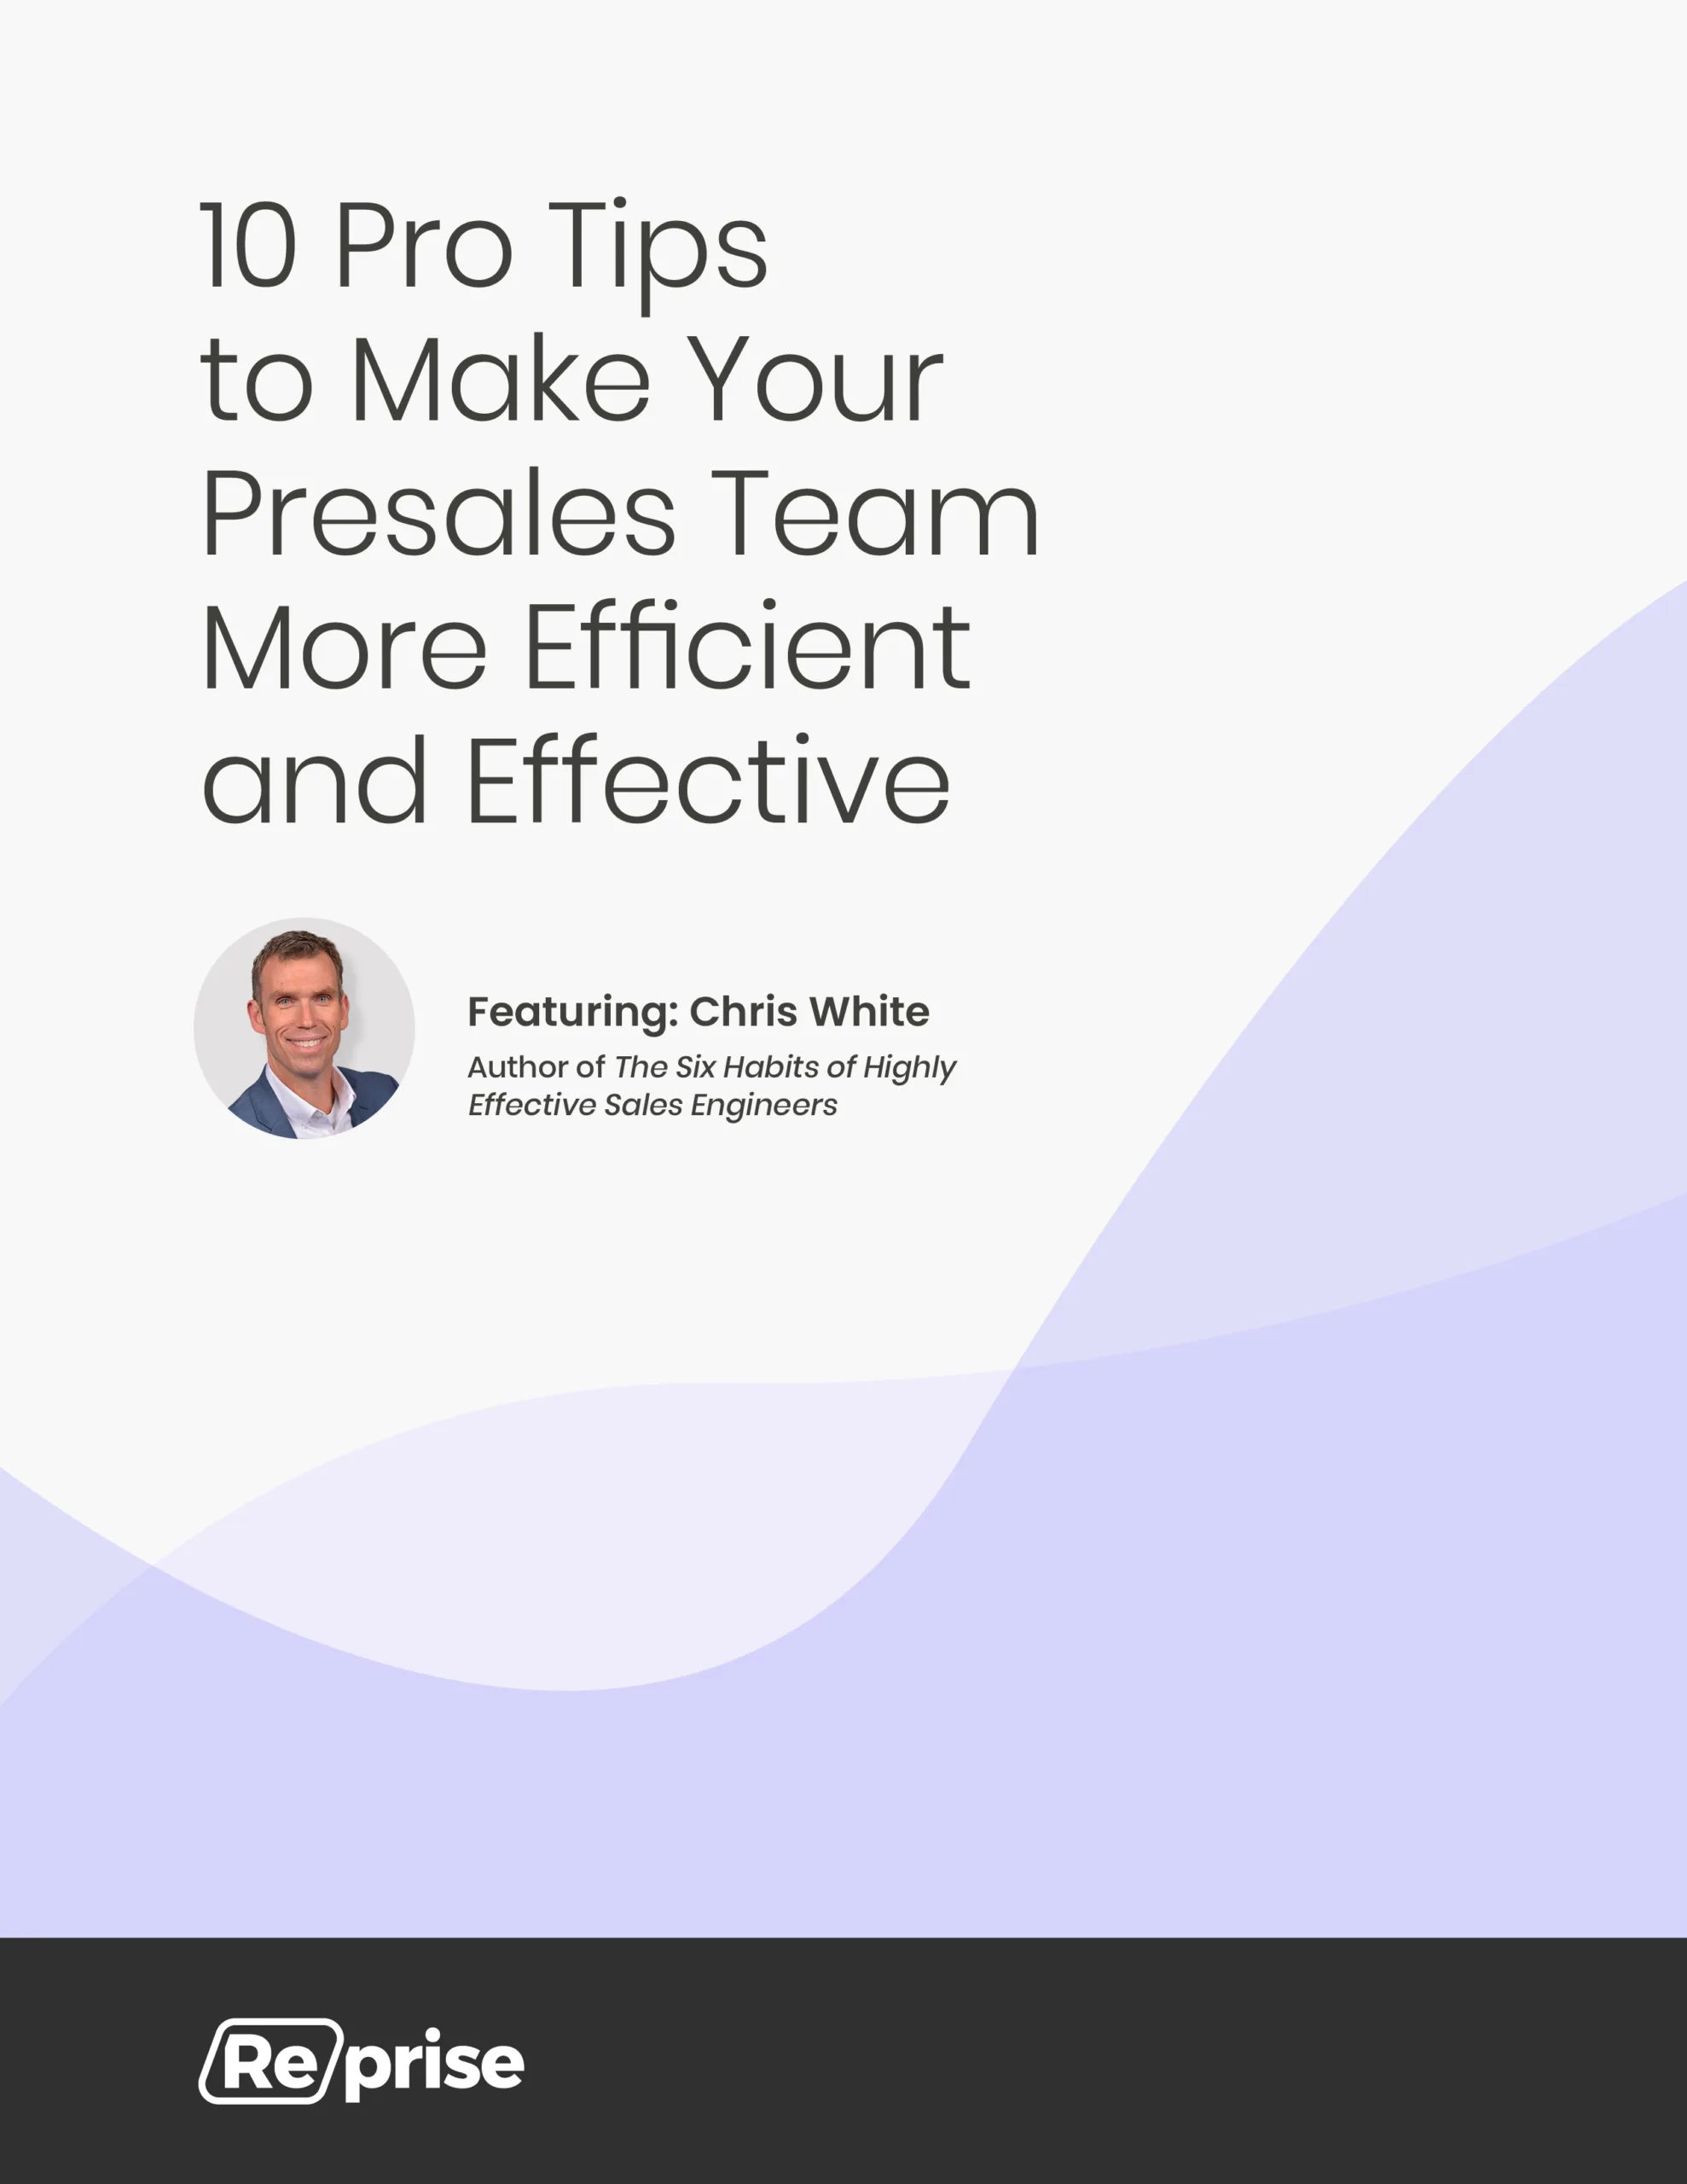 10 Pro Tips to Make Your Presales Team More Efficient and Effective